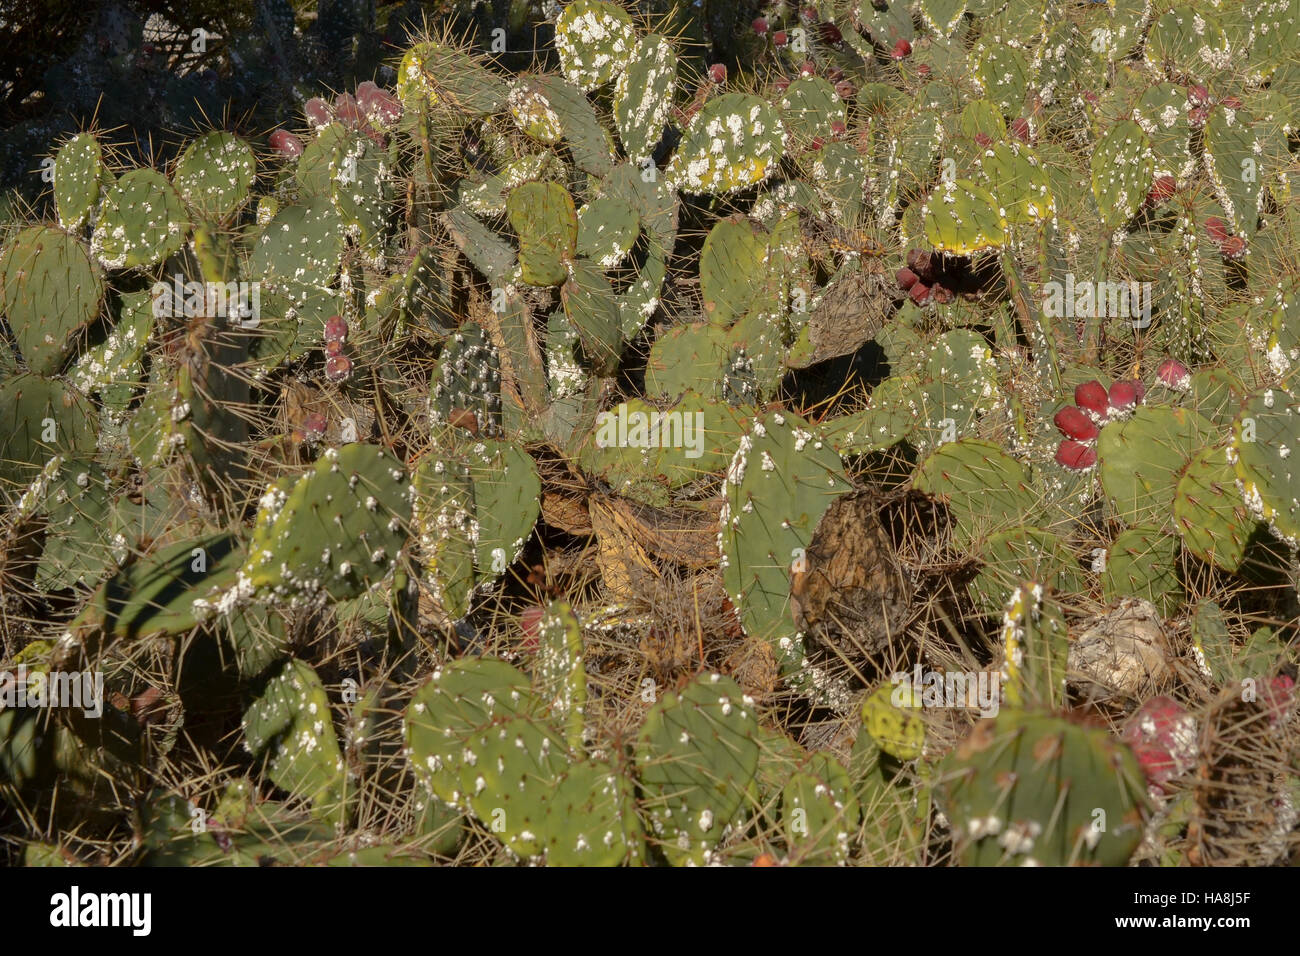 Prickly cactus (Opuntia phaeacantha) infested with cochineal scale insects Stock Photo